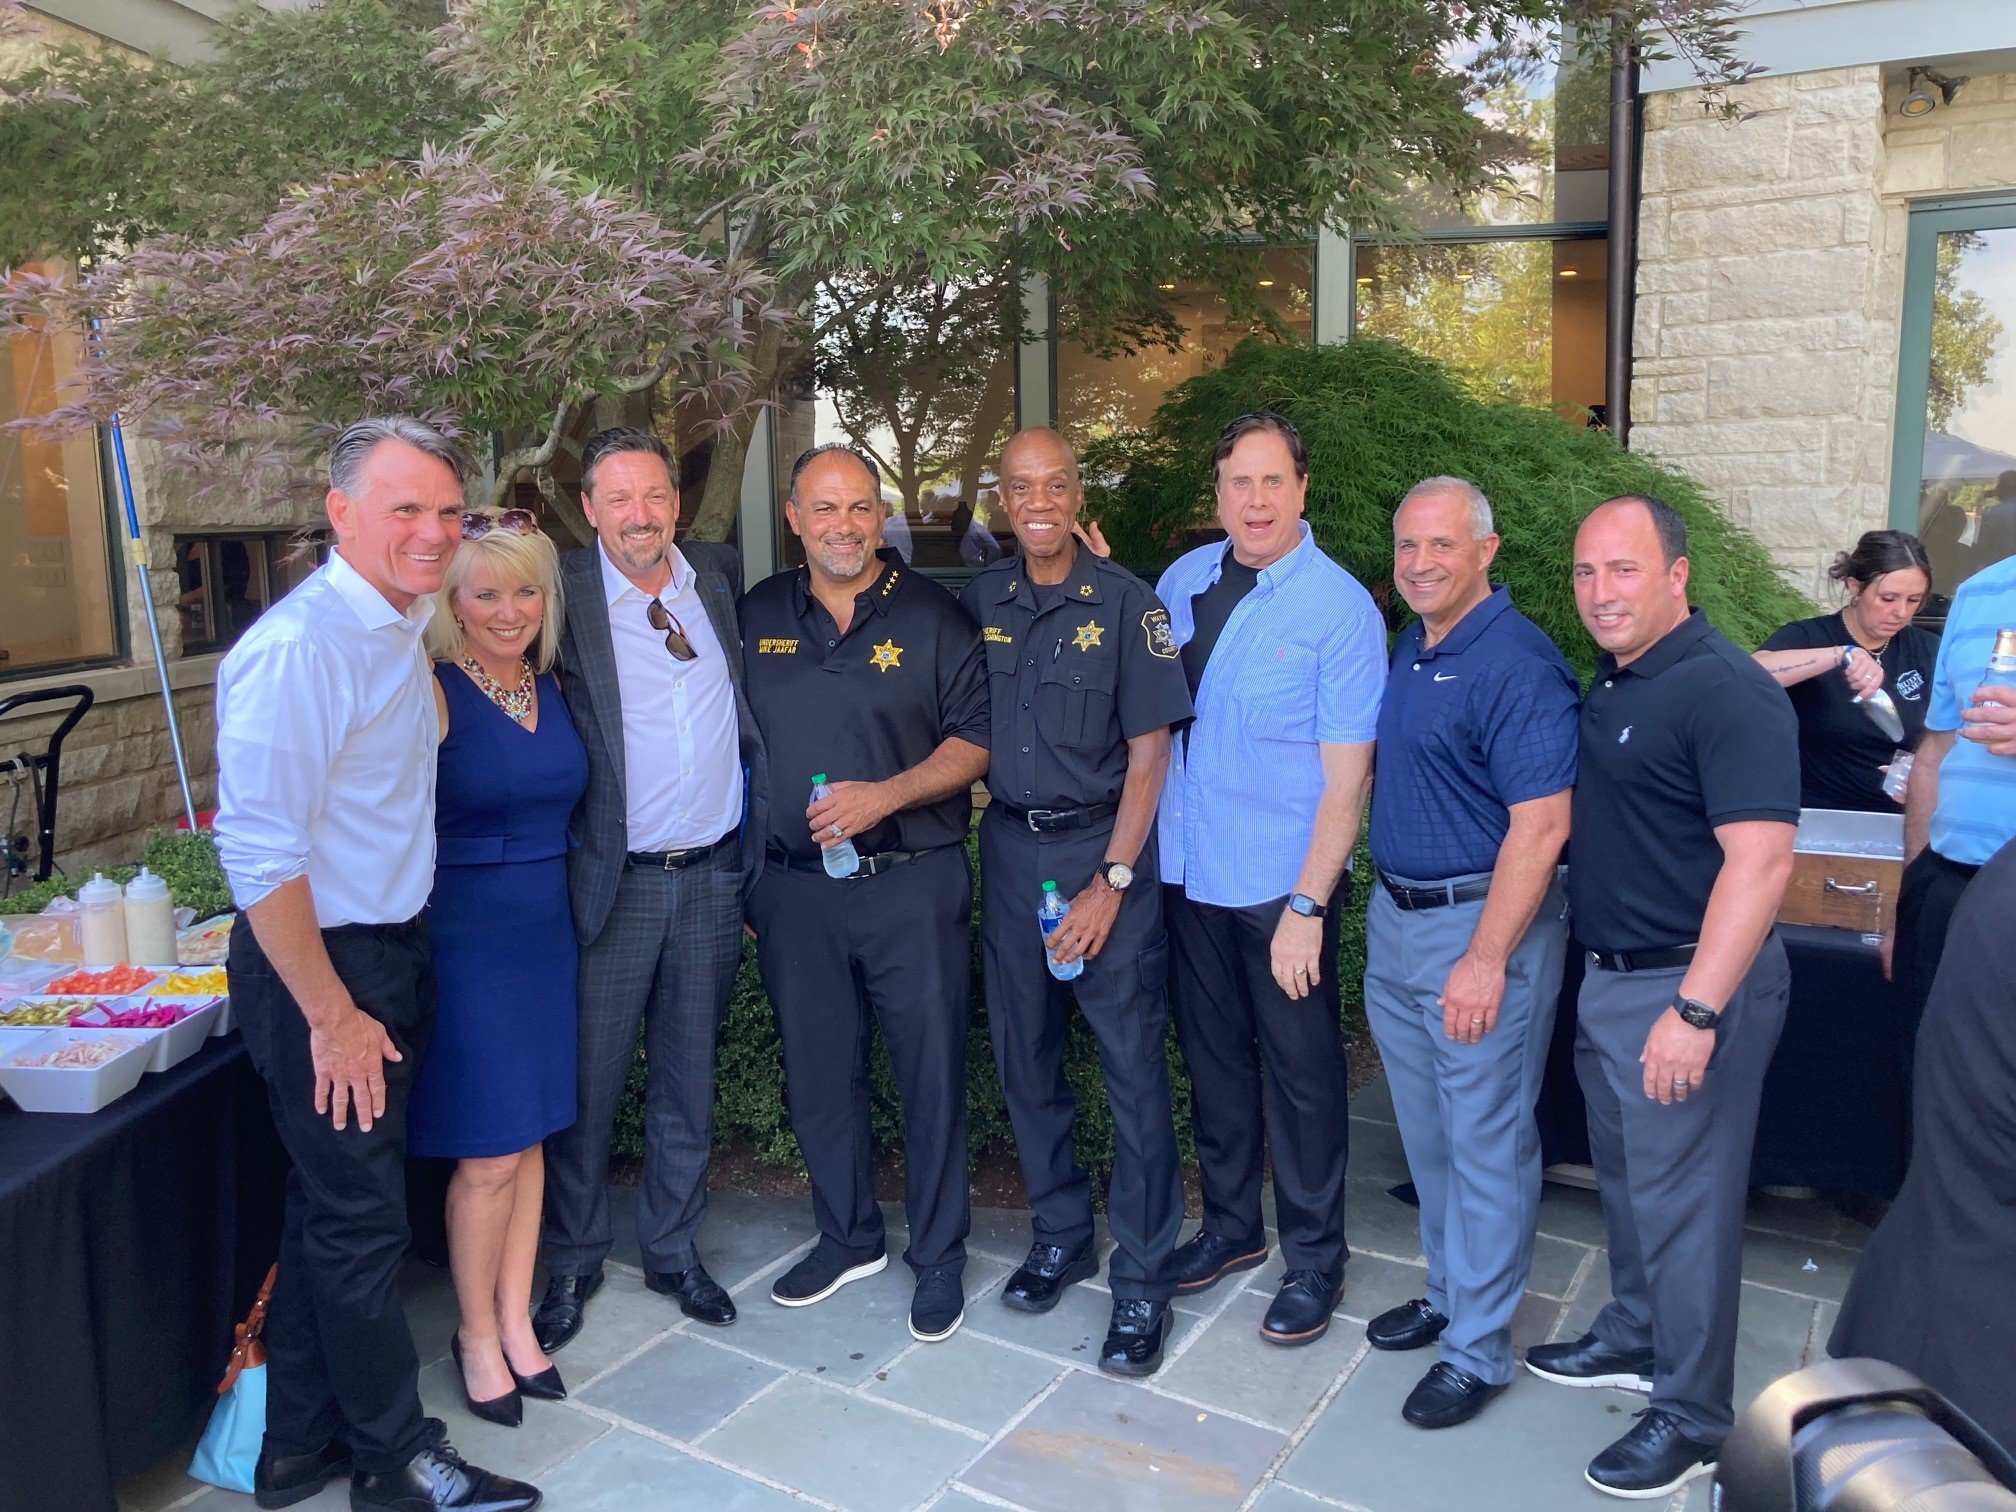  Lining up for a photo op, Left to right: Macomb County Executive Mark Hackel, Catherine Kochanski and Ken Gutman from Walled Lake Consolidated Schools, Wayne County Undersheriff Mike Jafaar and Wayne County Sheriff Raphael “Ray” Washington, Oakland 